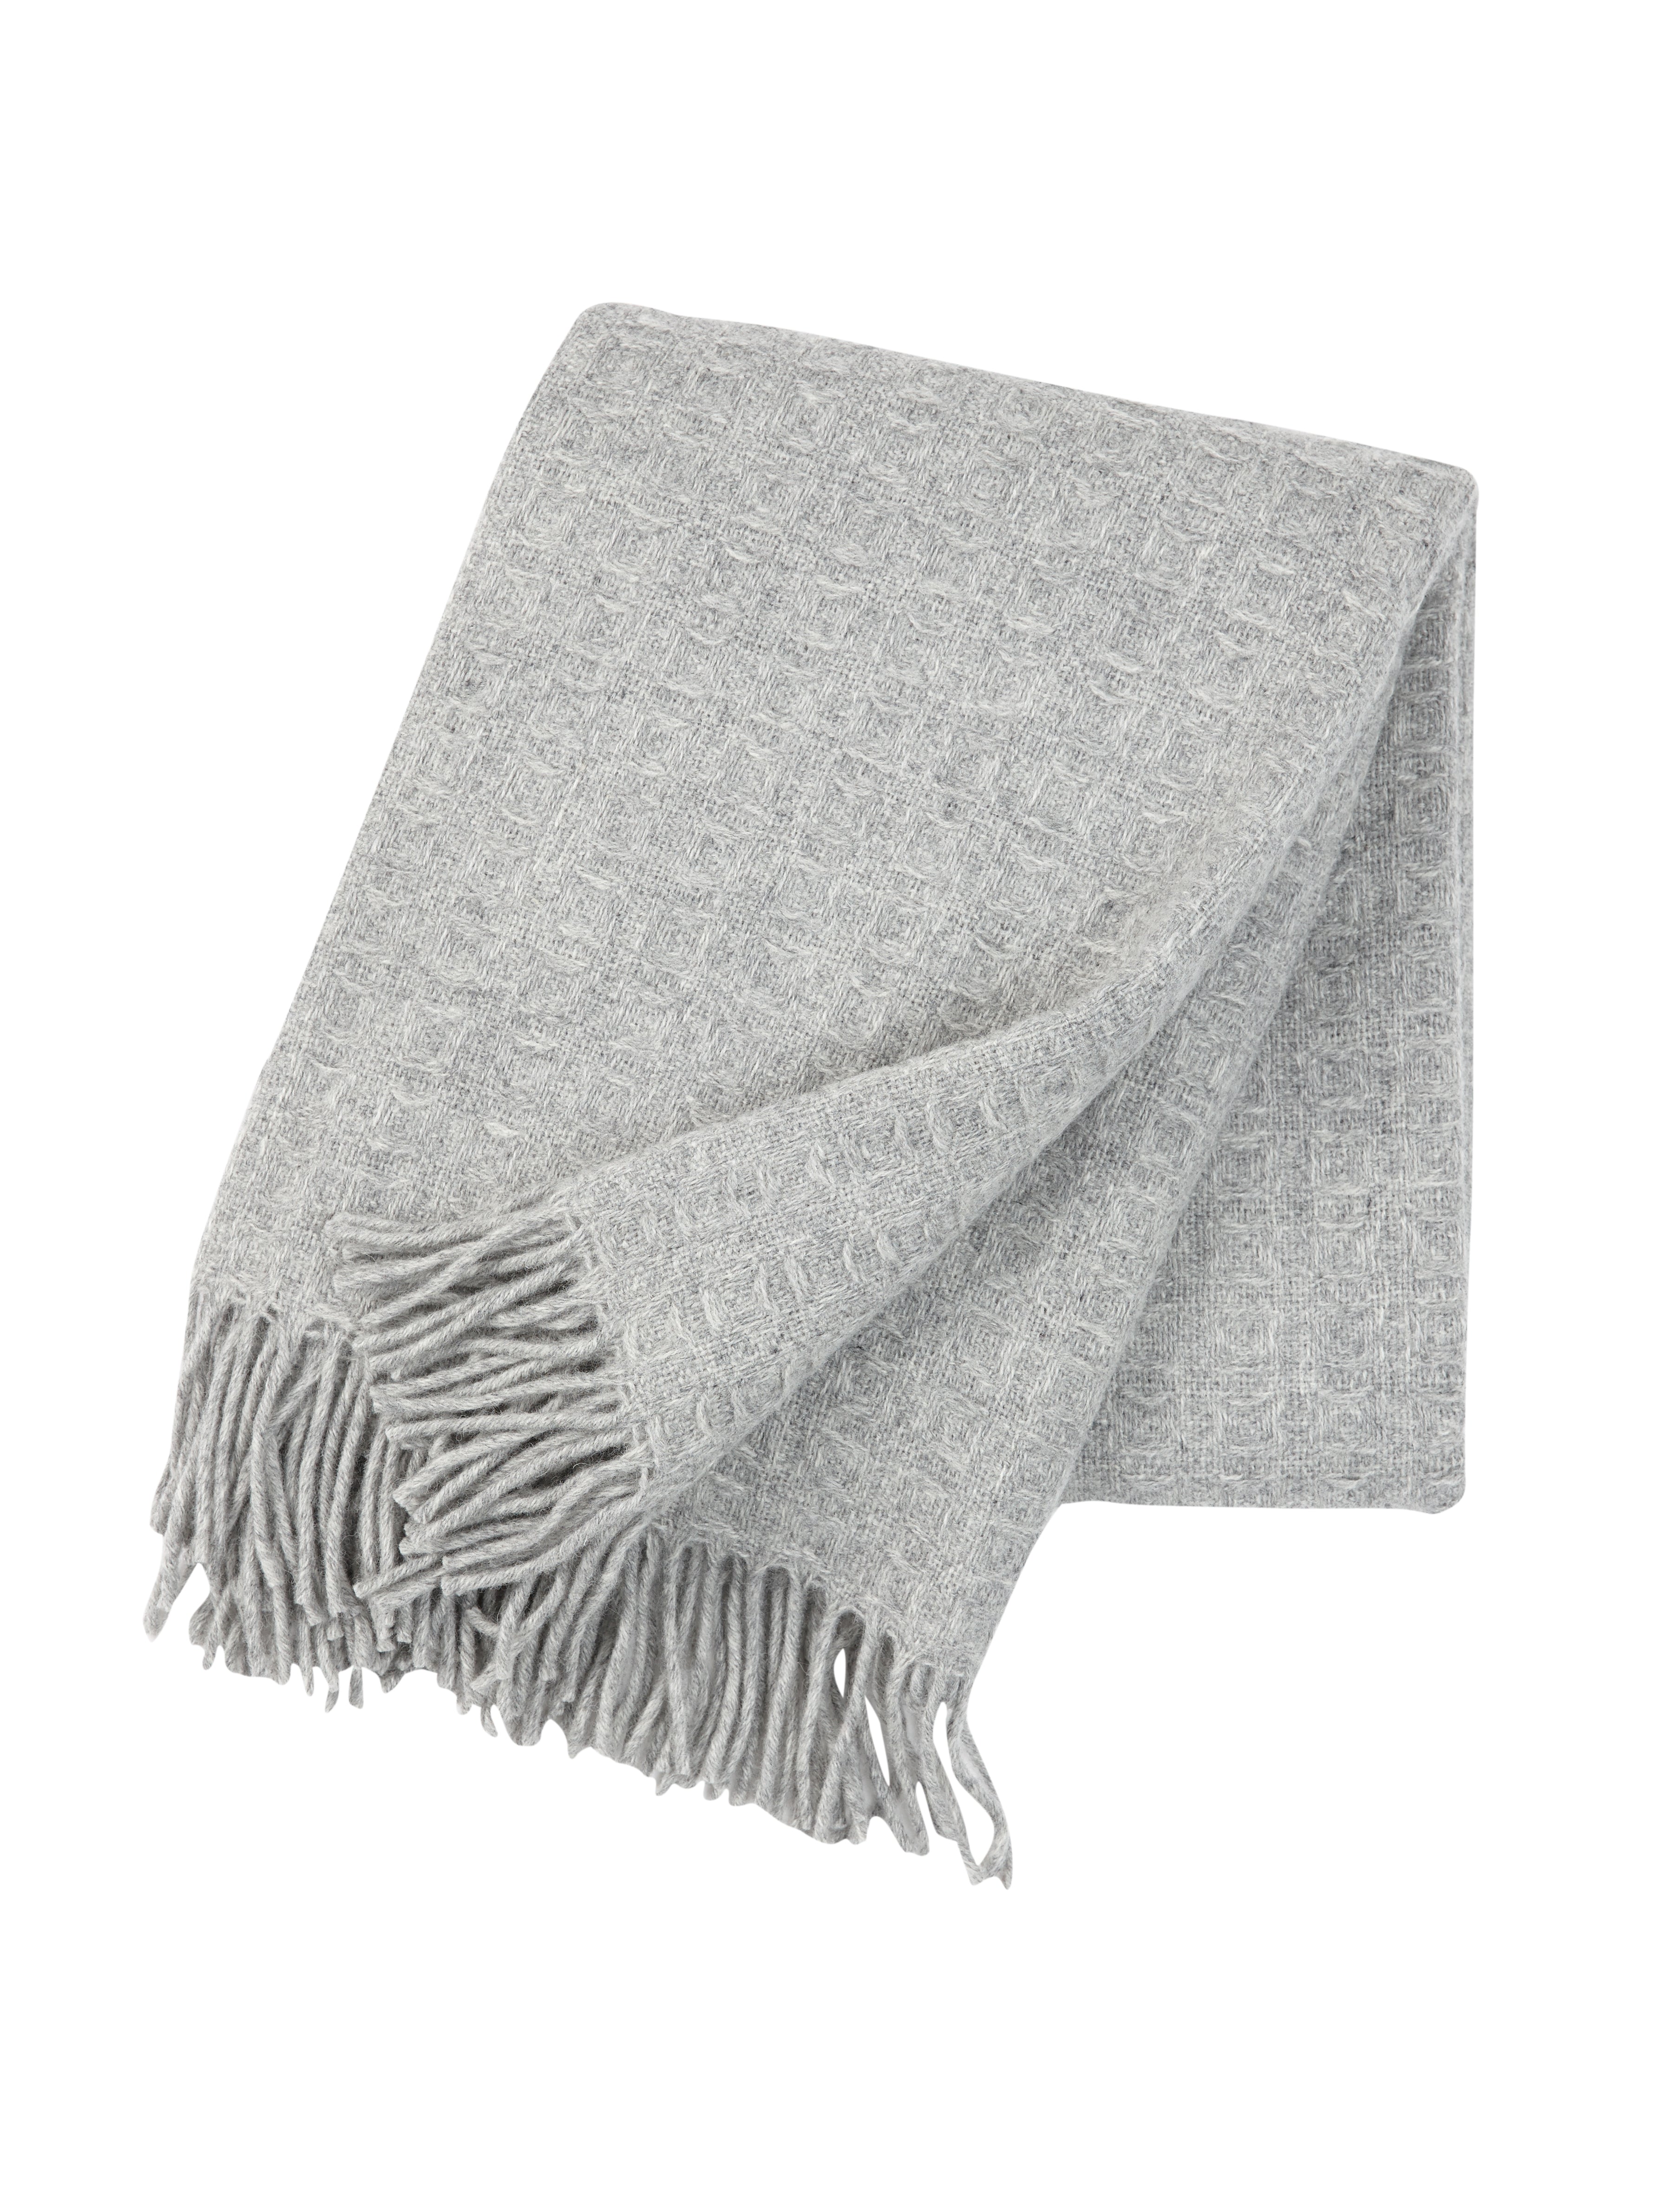 Lambswool Blankets + Cotton Throws